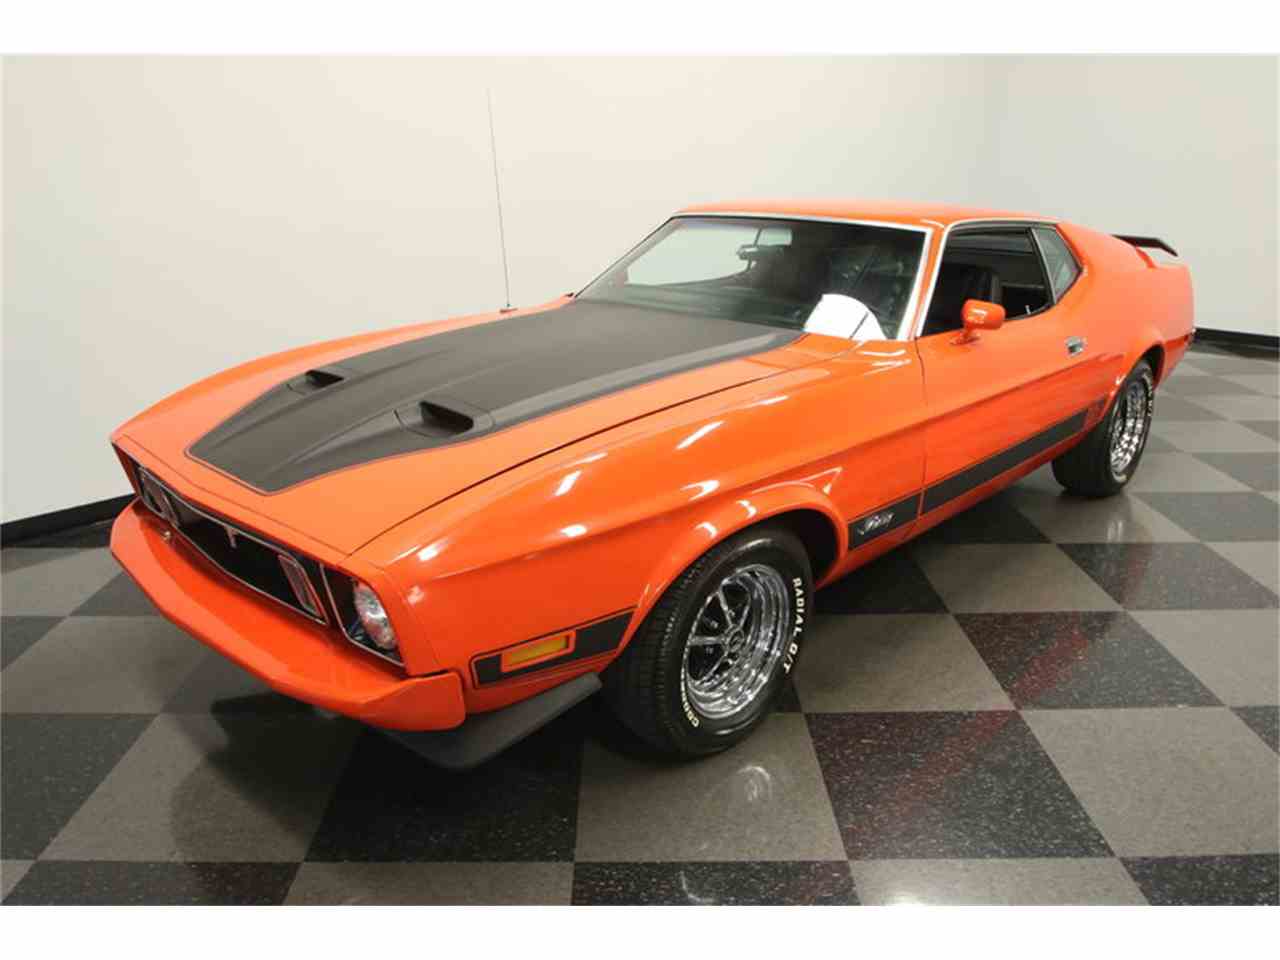 1973 Ford Mustang Mach 1 for Sale | ClassicCars.com | CC-997099